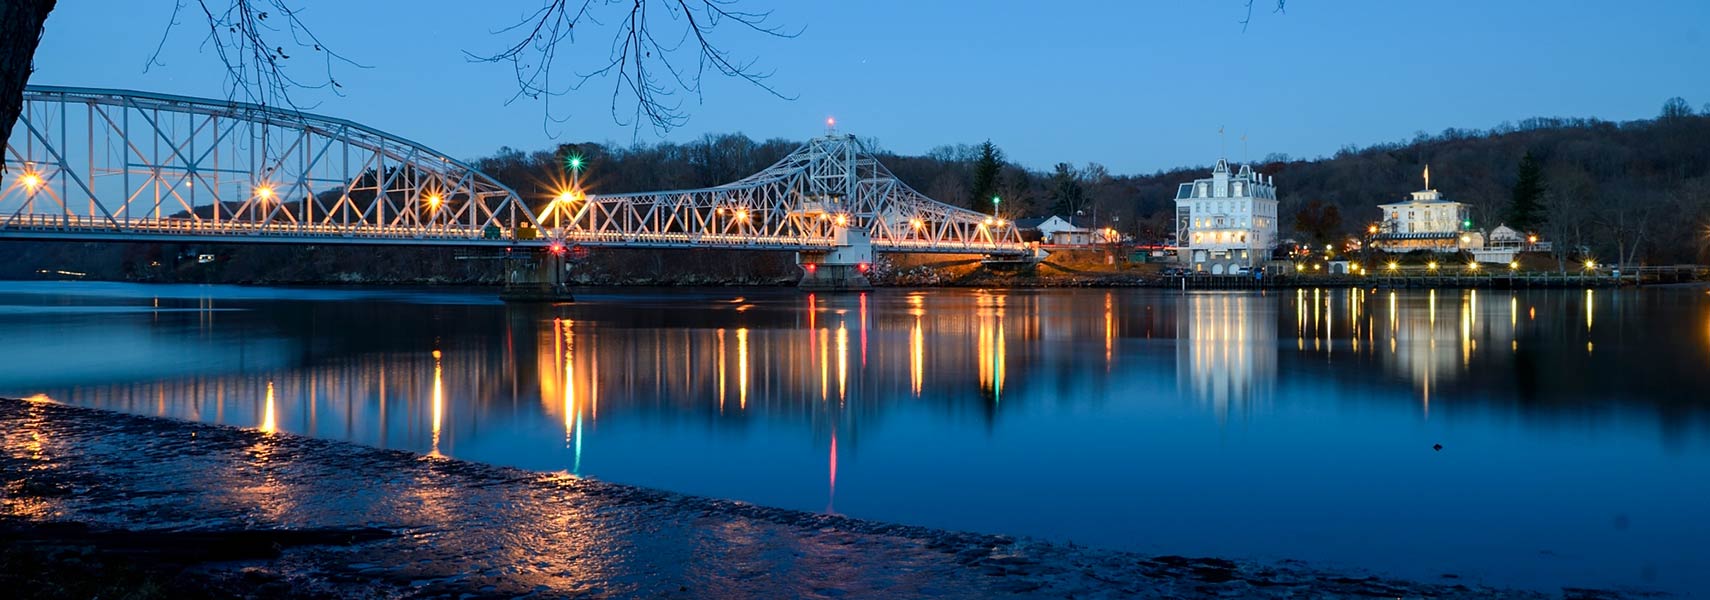 East Haddam Swing Bridge and Goodspeed Opera House in Connecticut